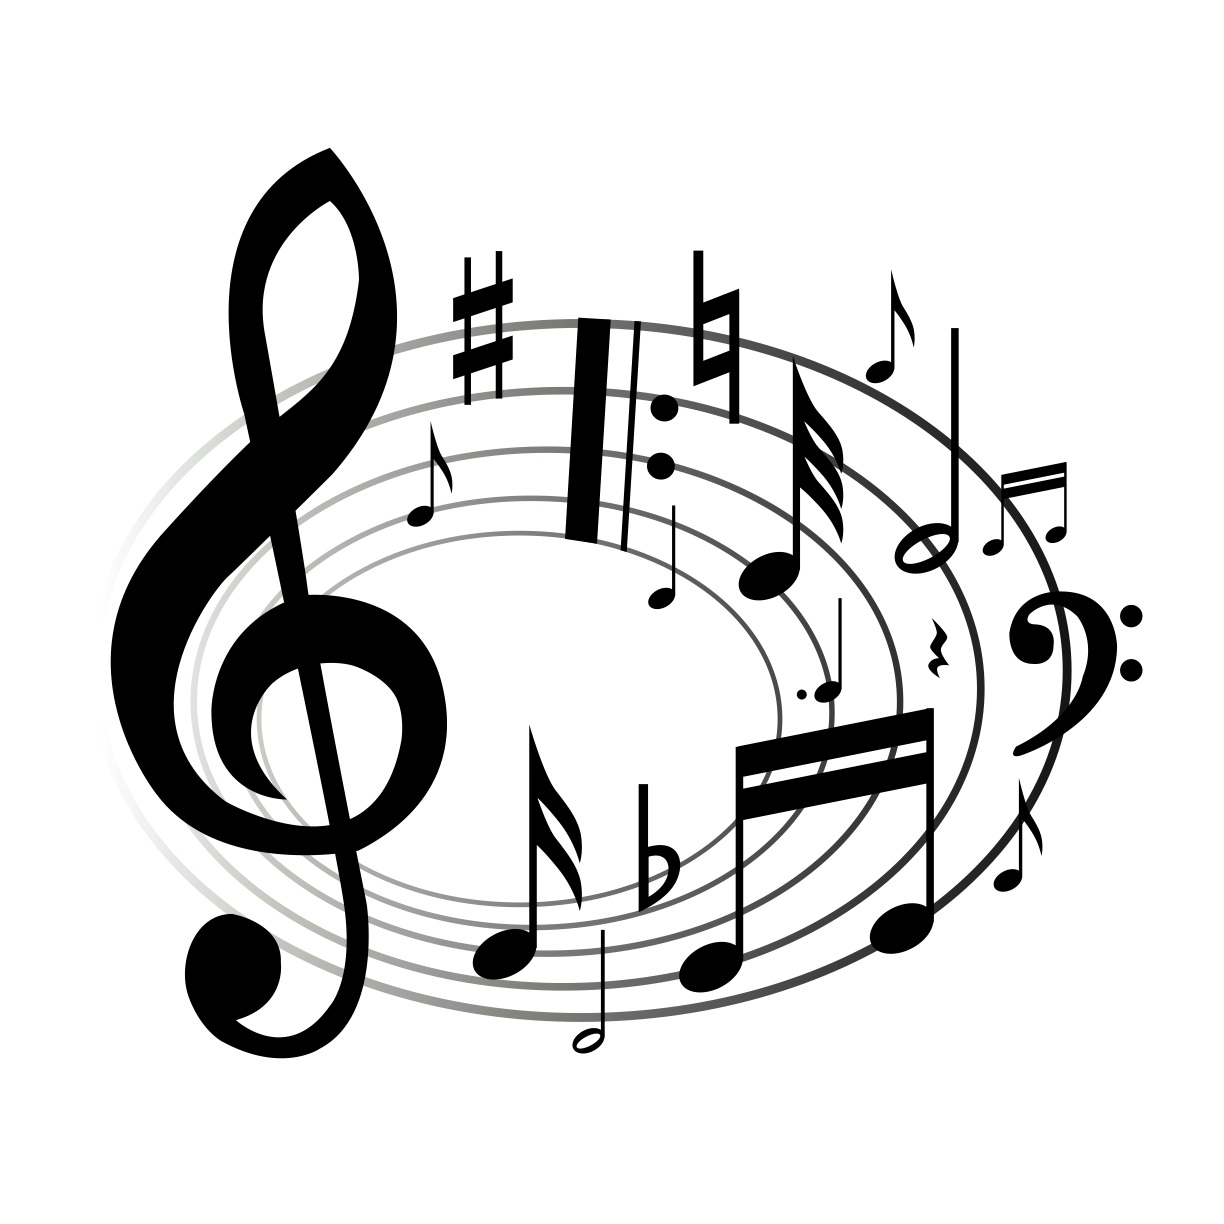 Musical music notes clipart black and white free clipart